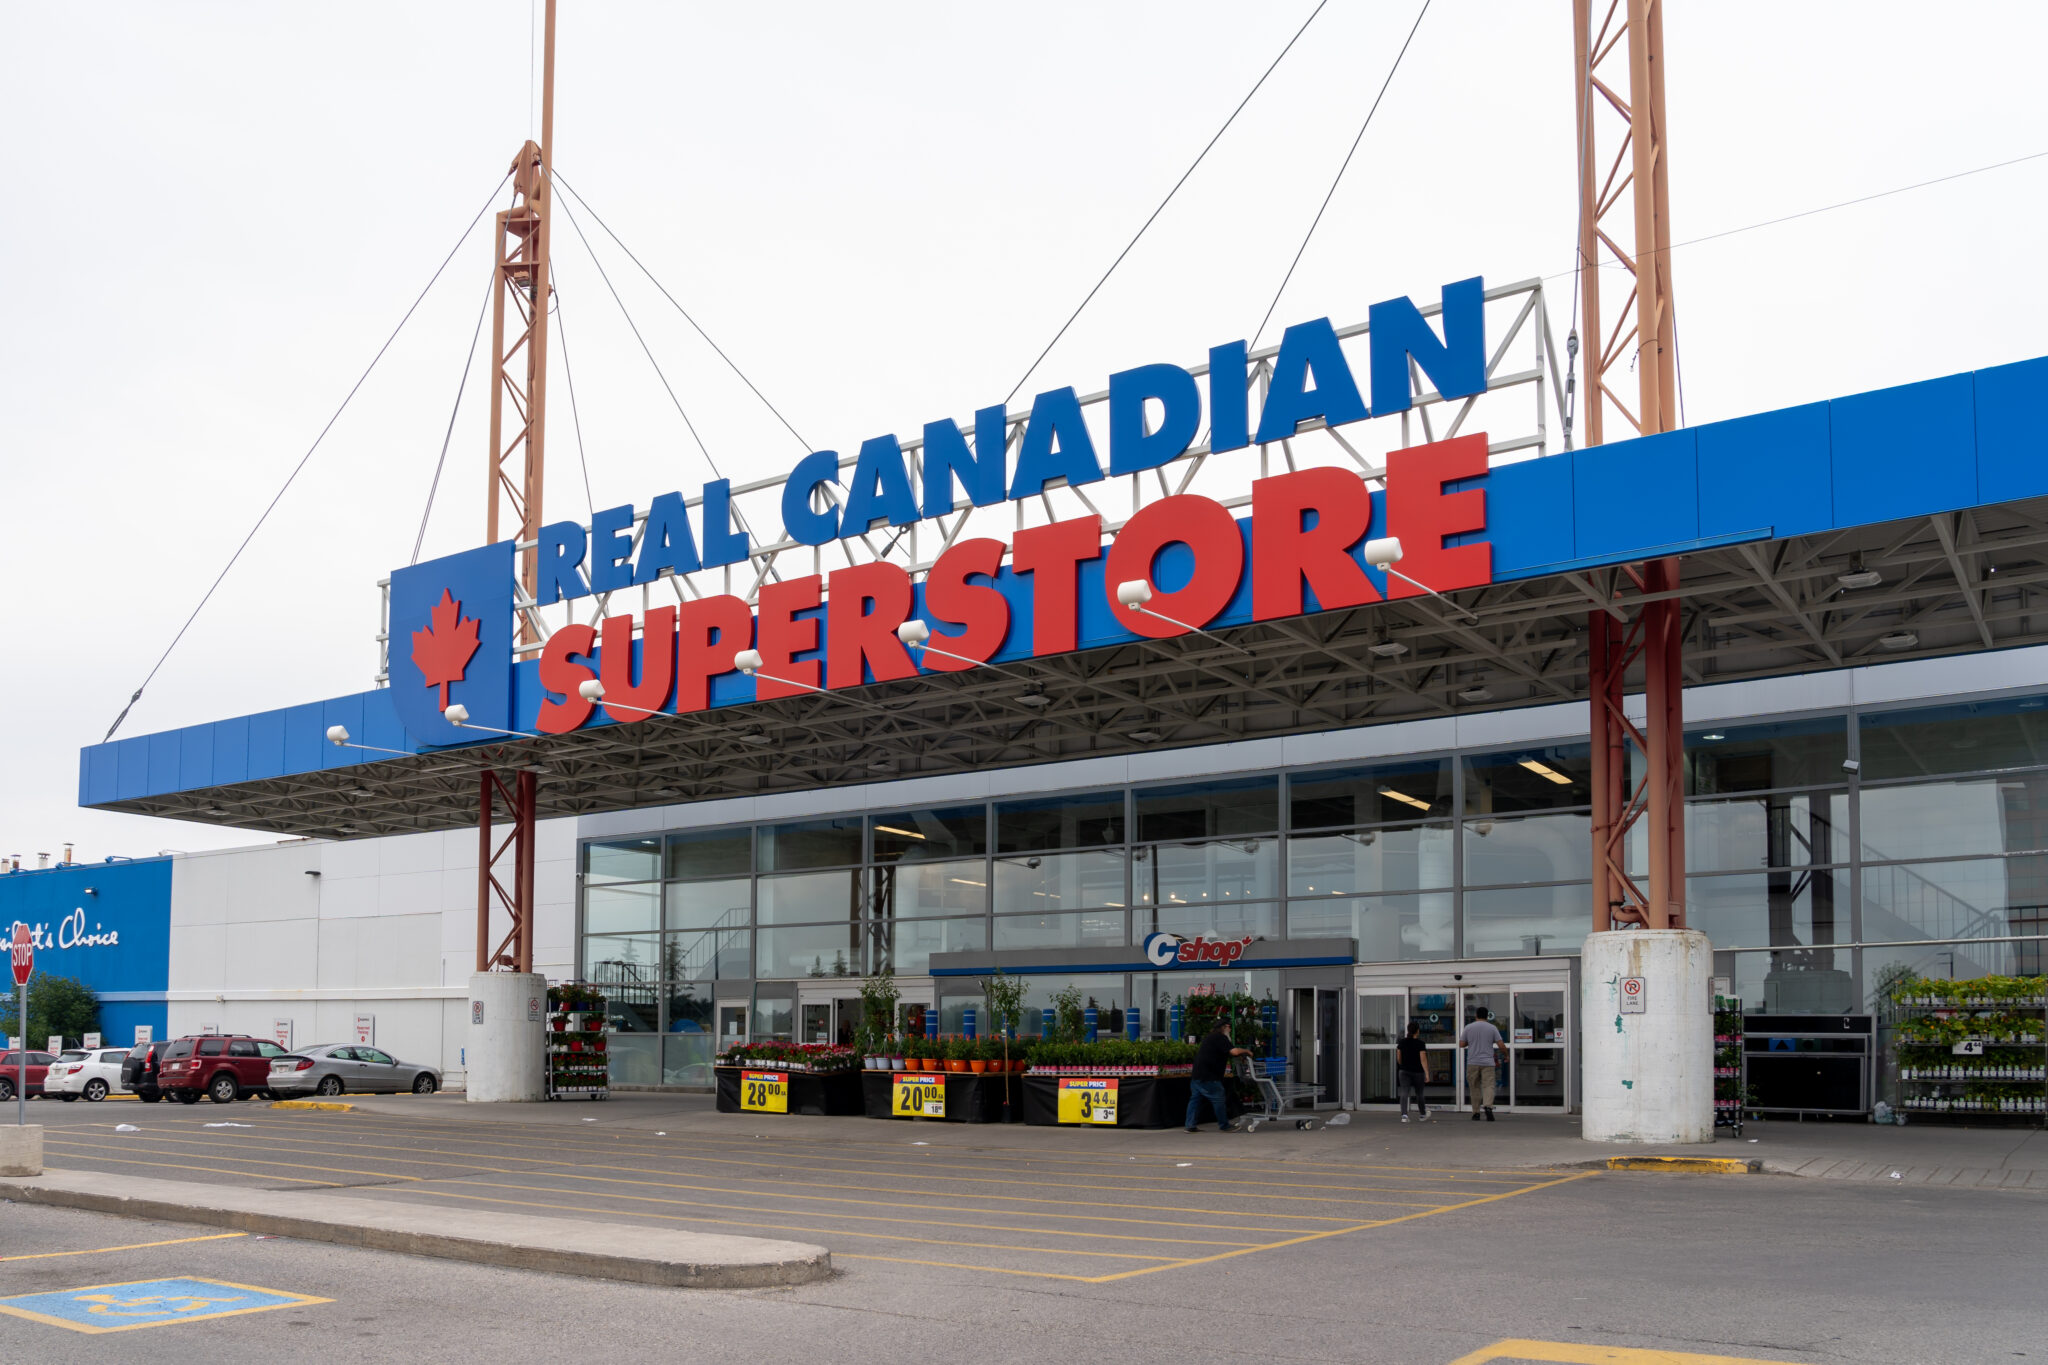 Superstores in Canada use carts that lock at exits